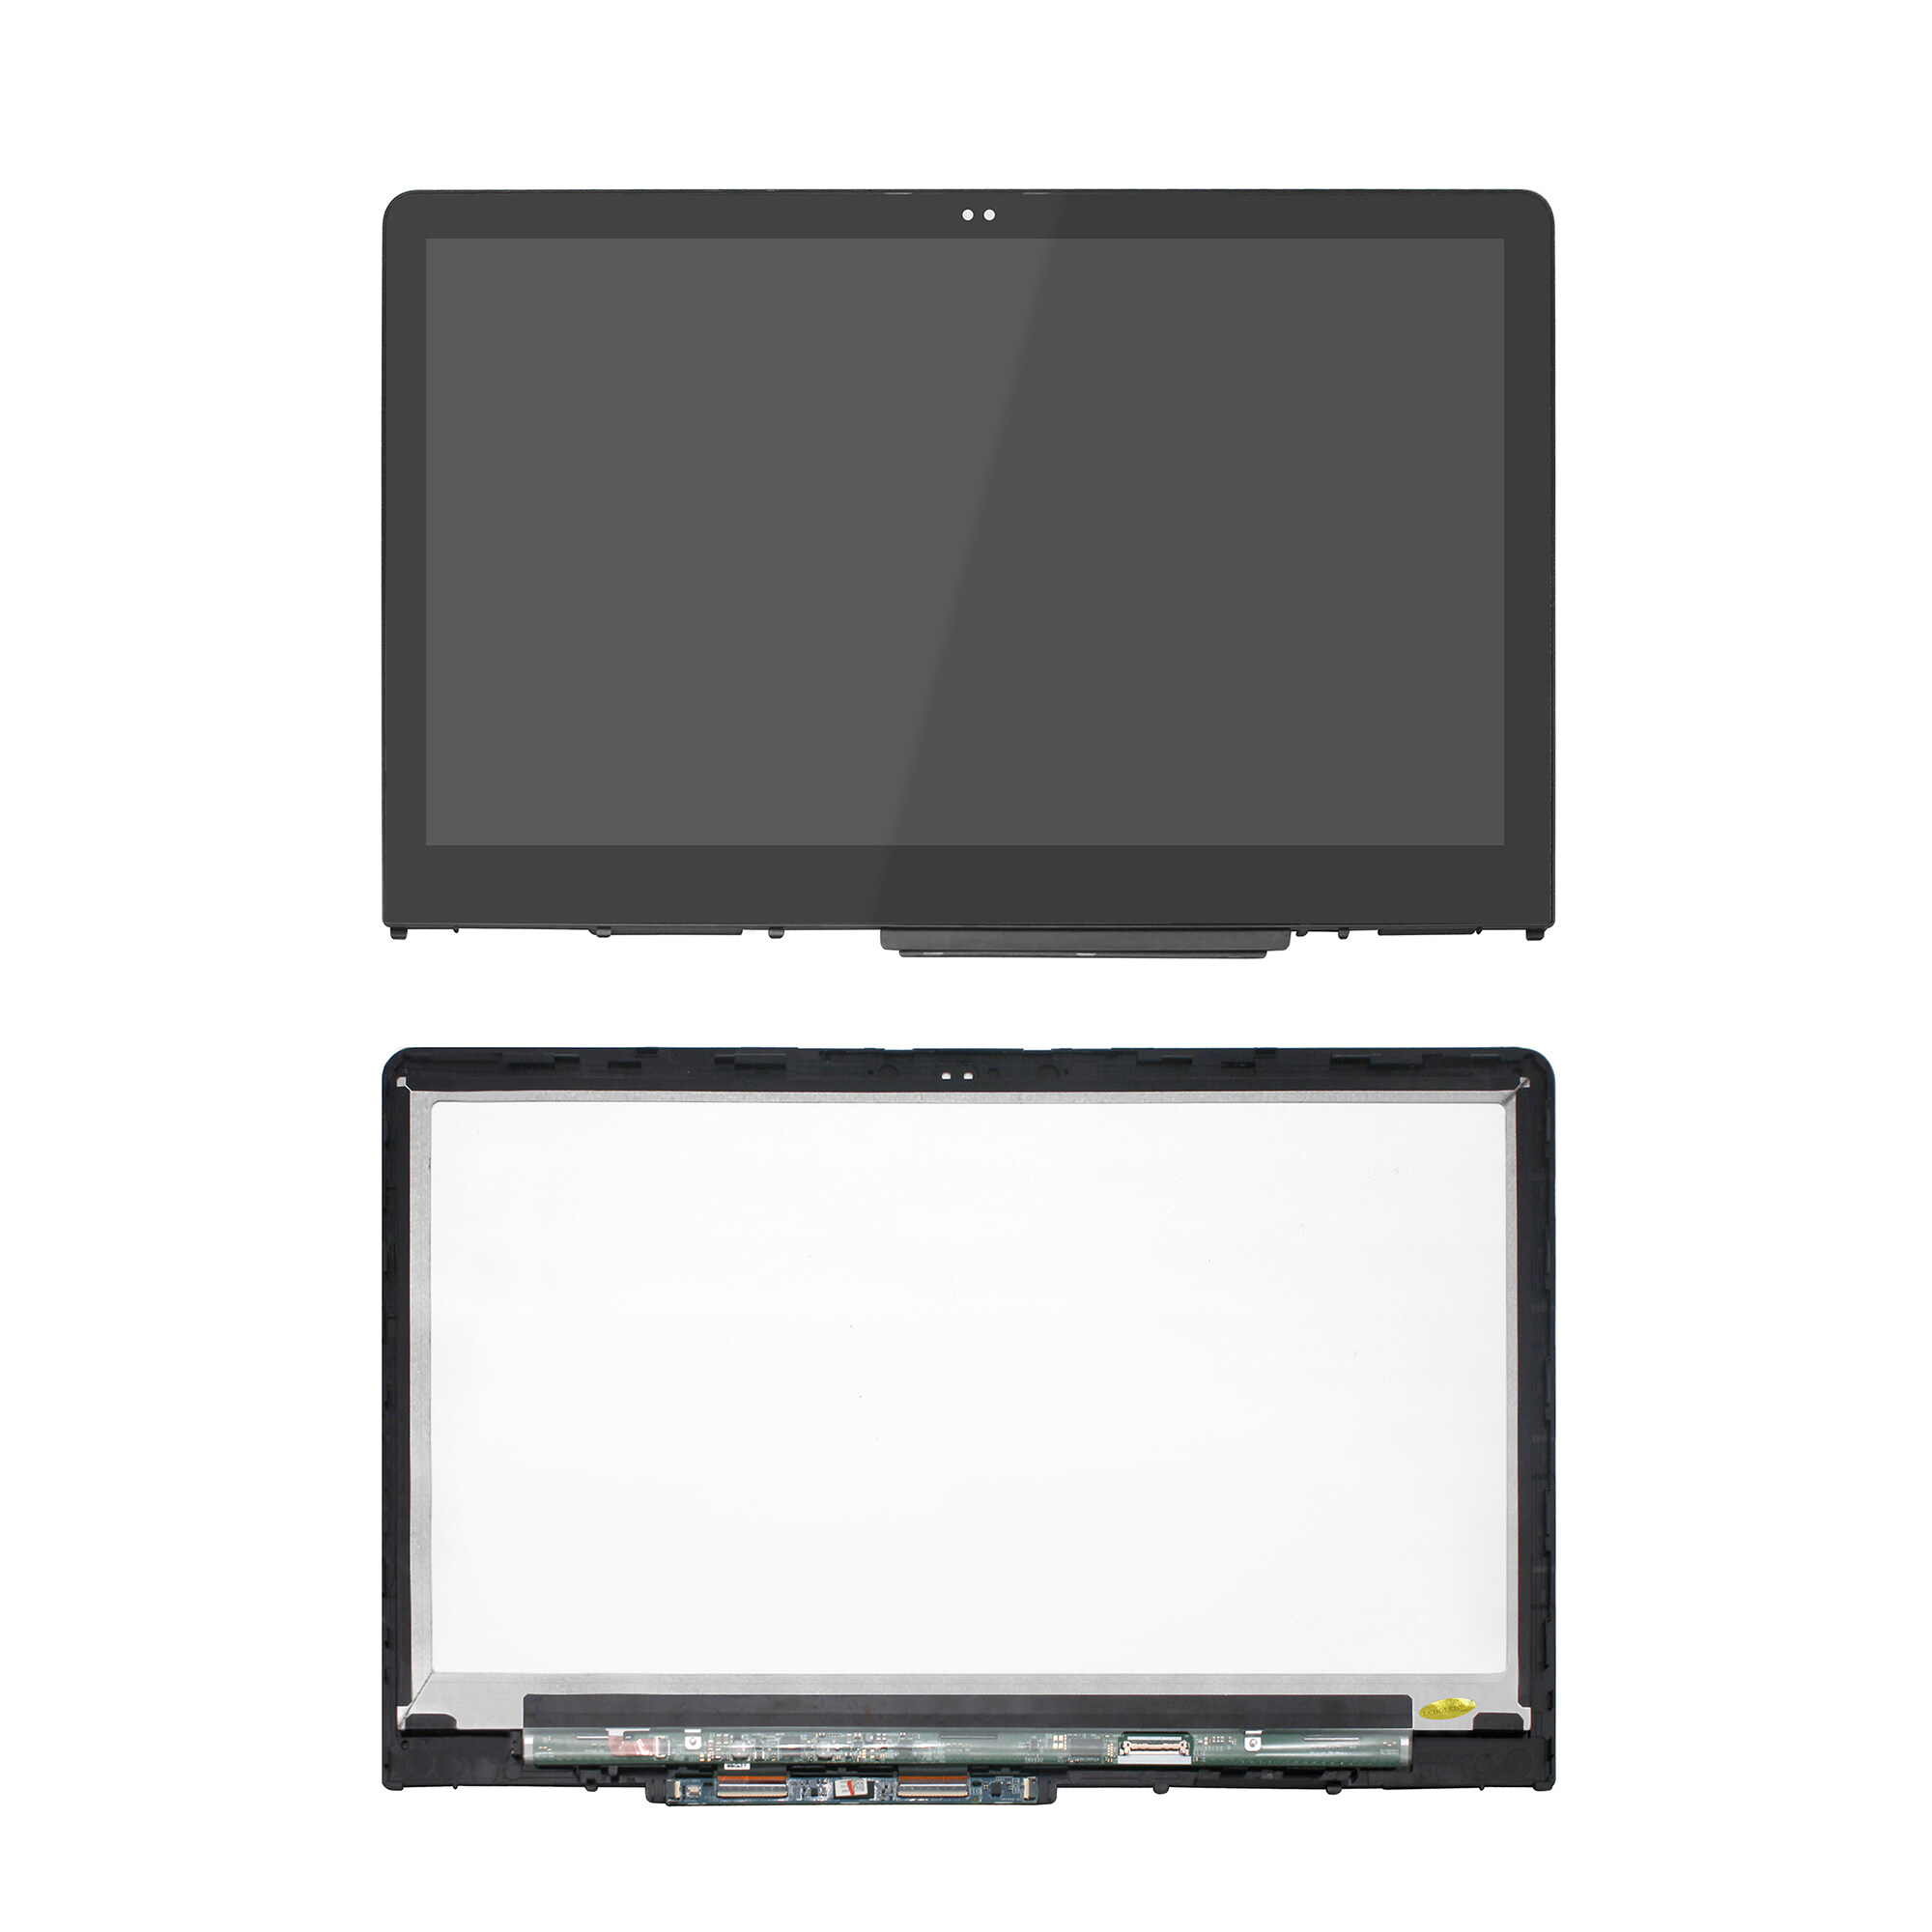 Kreplacement 15.6" LED LCD Touchscreen Display for HP Pavilion x360 15-BR000 15-br 925711-001 15-br052od 924531-001